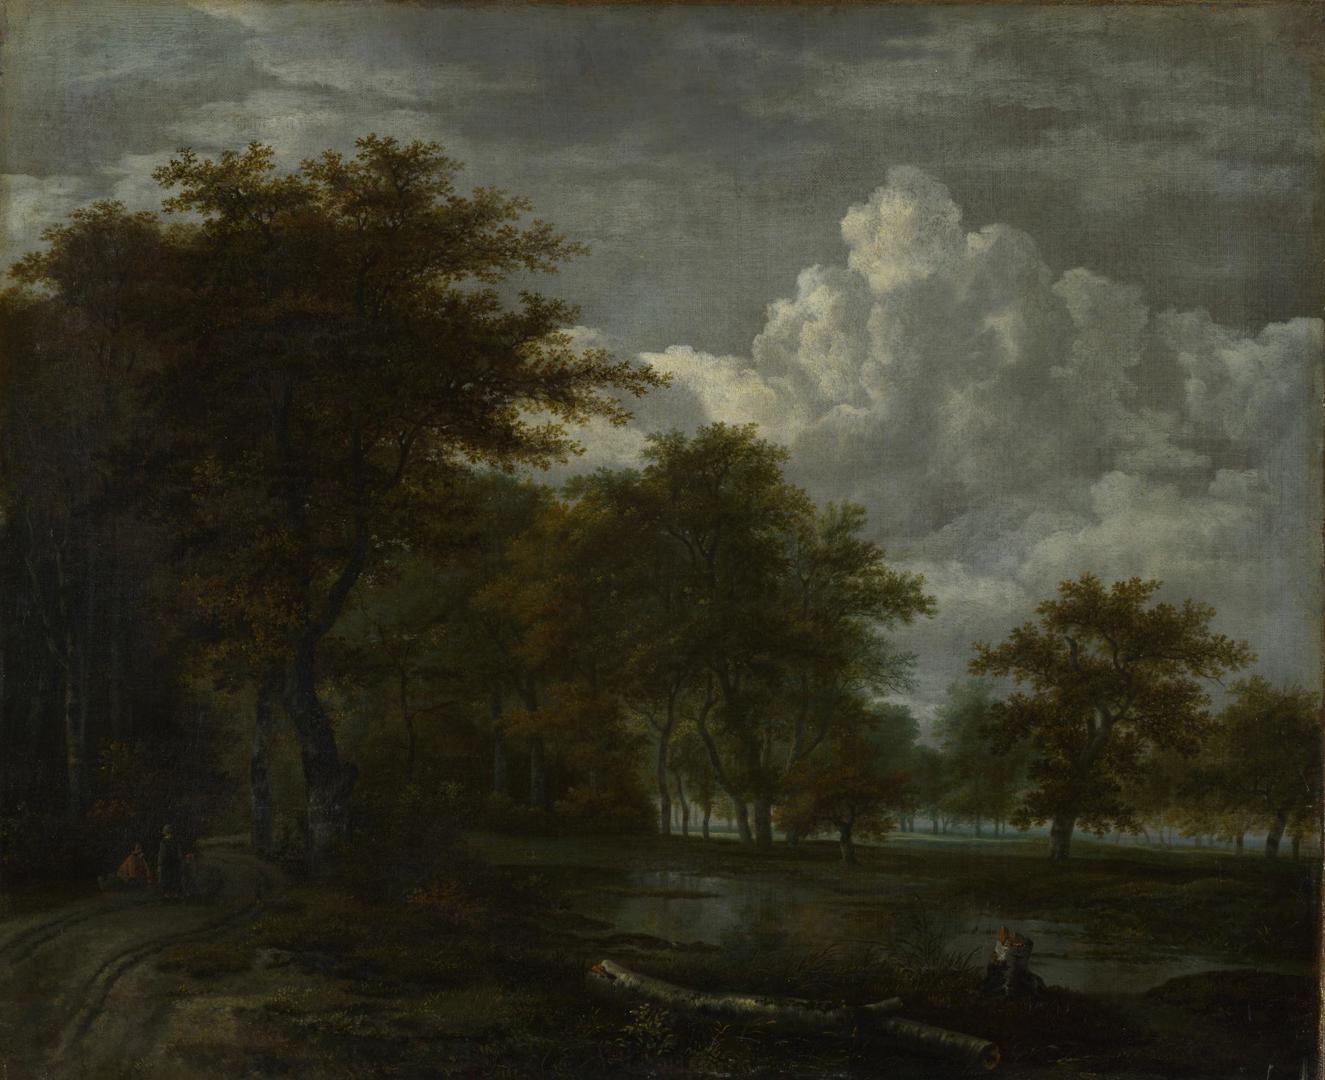 The Skirts of a Forest by Follower of Jacob van Ruisdael